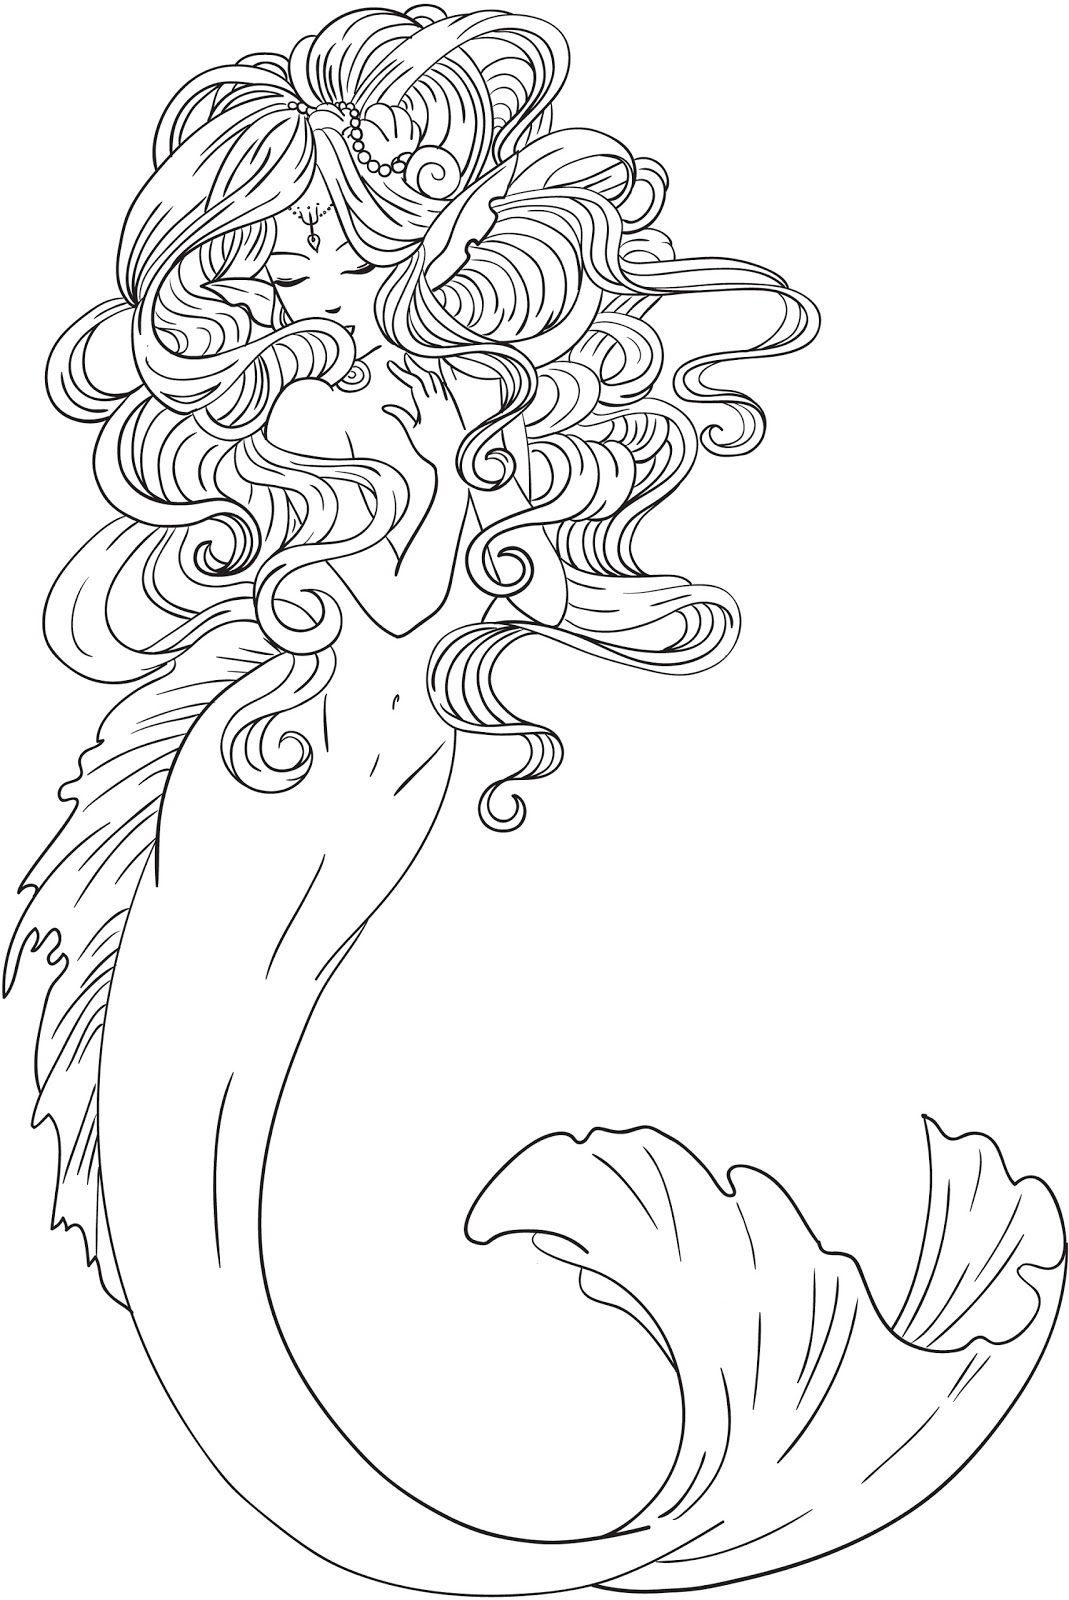 Detailed Mermaid Coloring Pages Realistic Mermaid Colouring Pages 2260 Realistic Mermaid Coloring